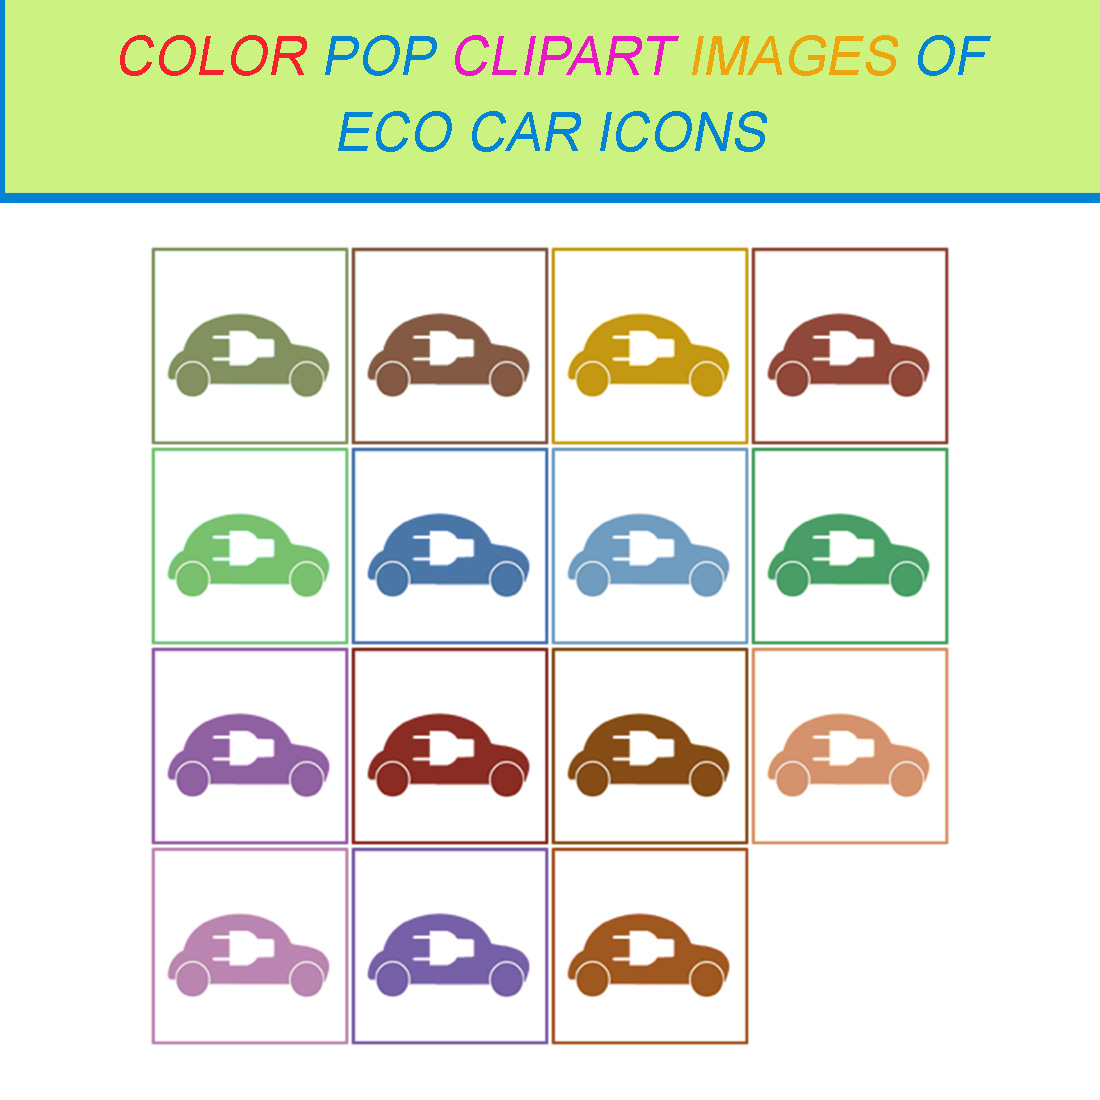 15 COLOR POP CLIPART IMAGES OF ECO CAR ICONS cover image.